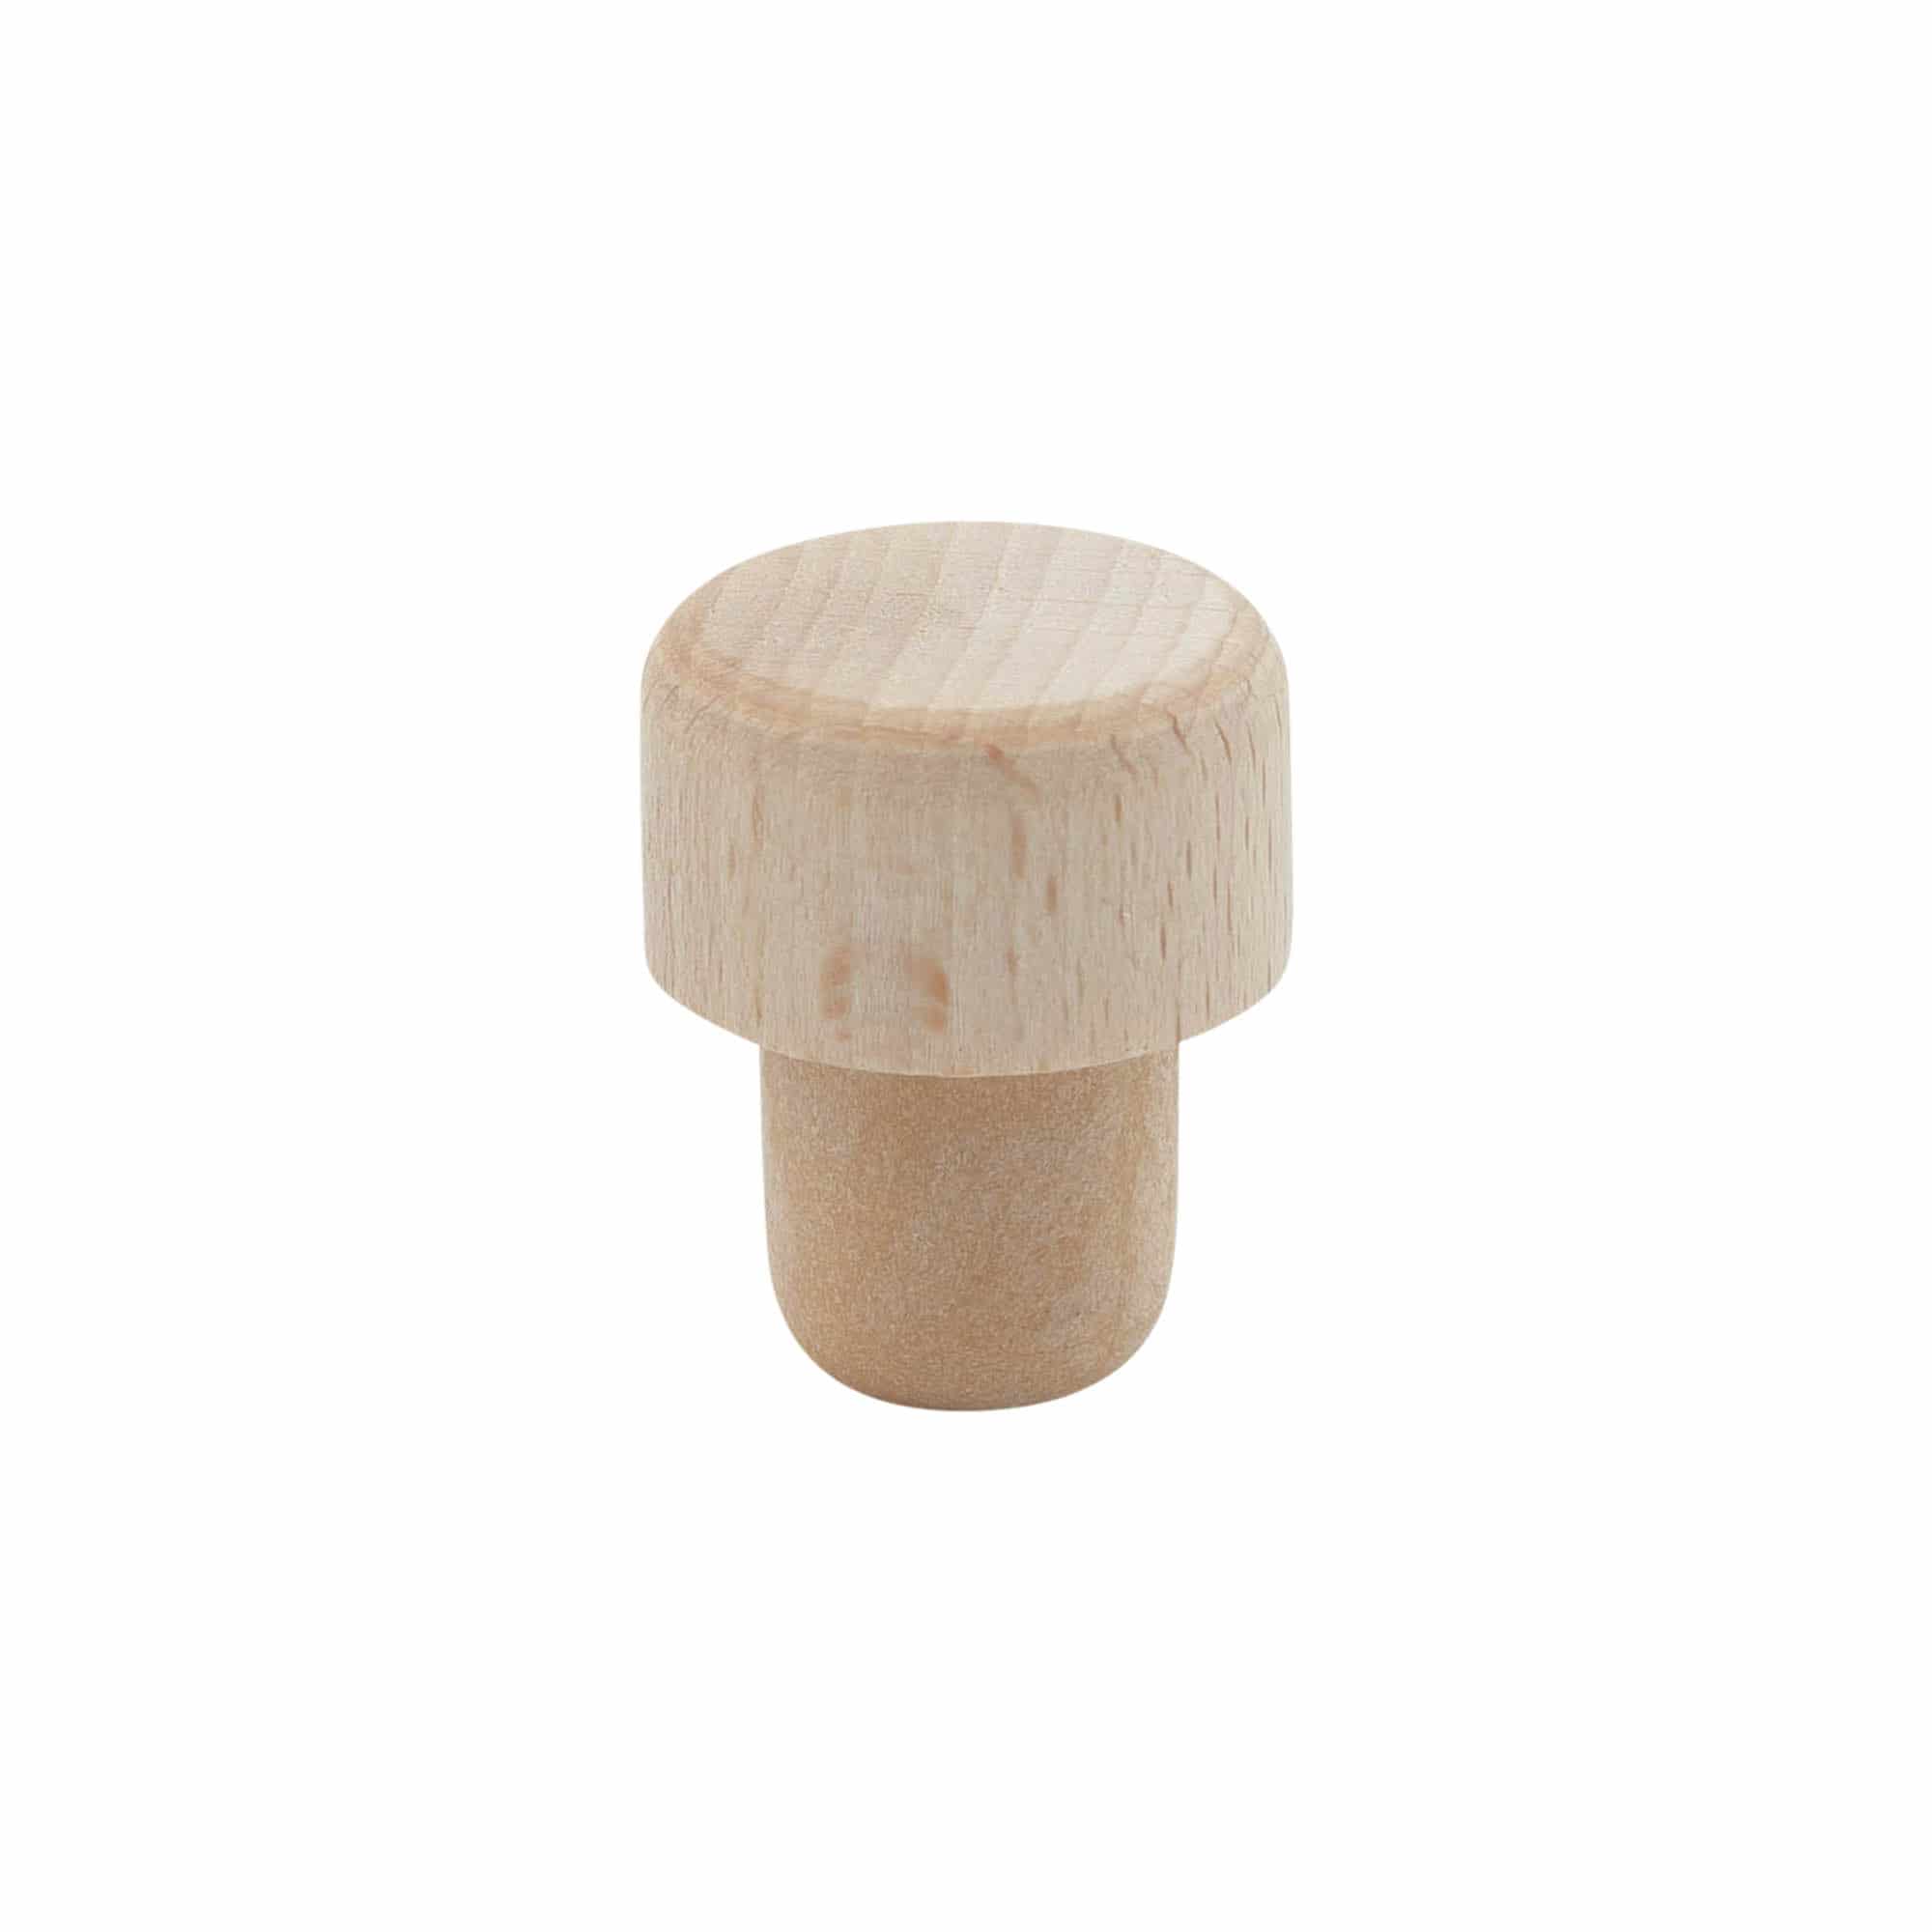 19 mm mushroom cork with dispensing hole, plastic/wood, multicolour, for opening: cork